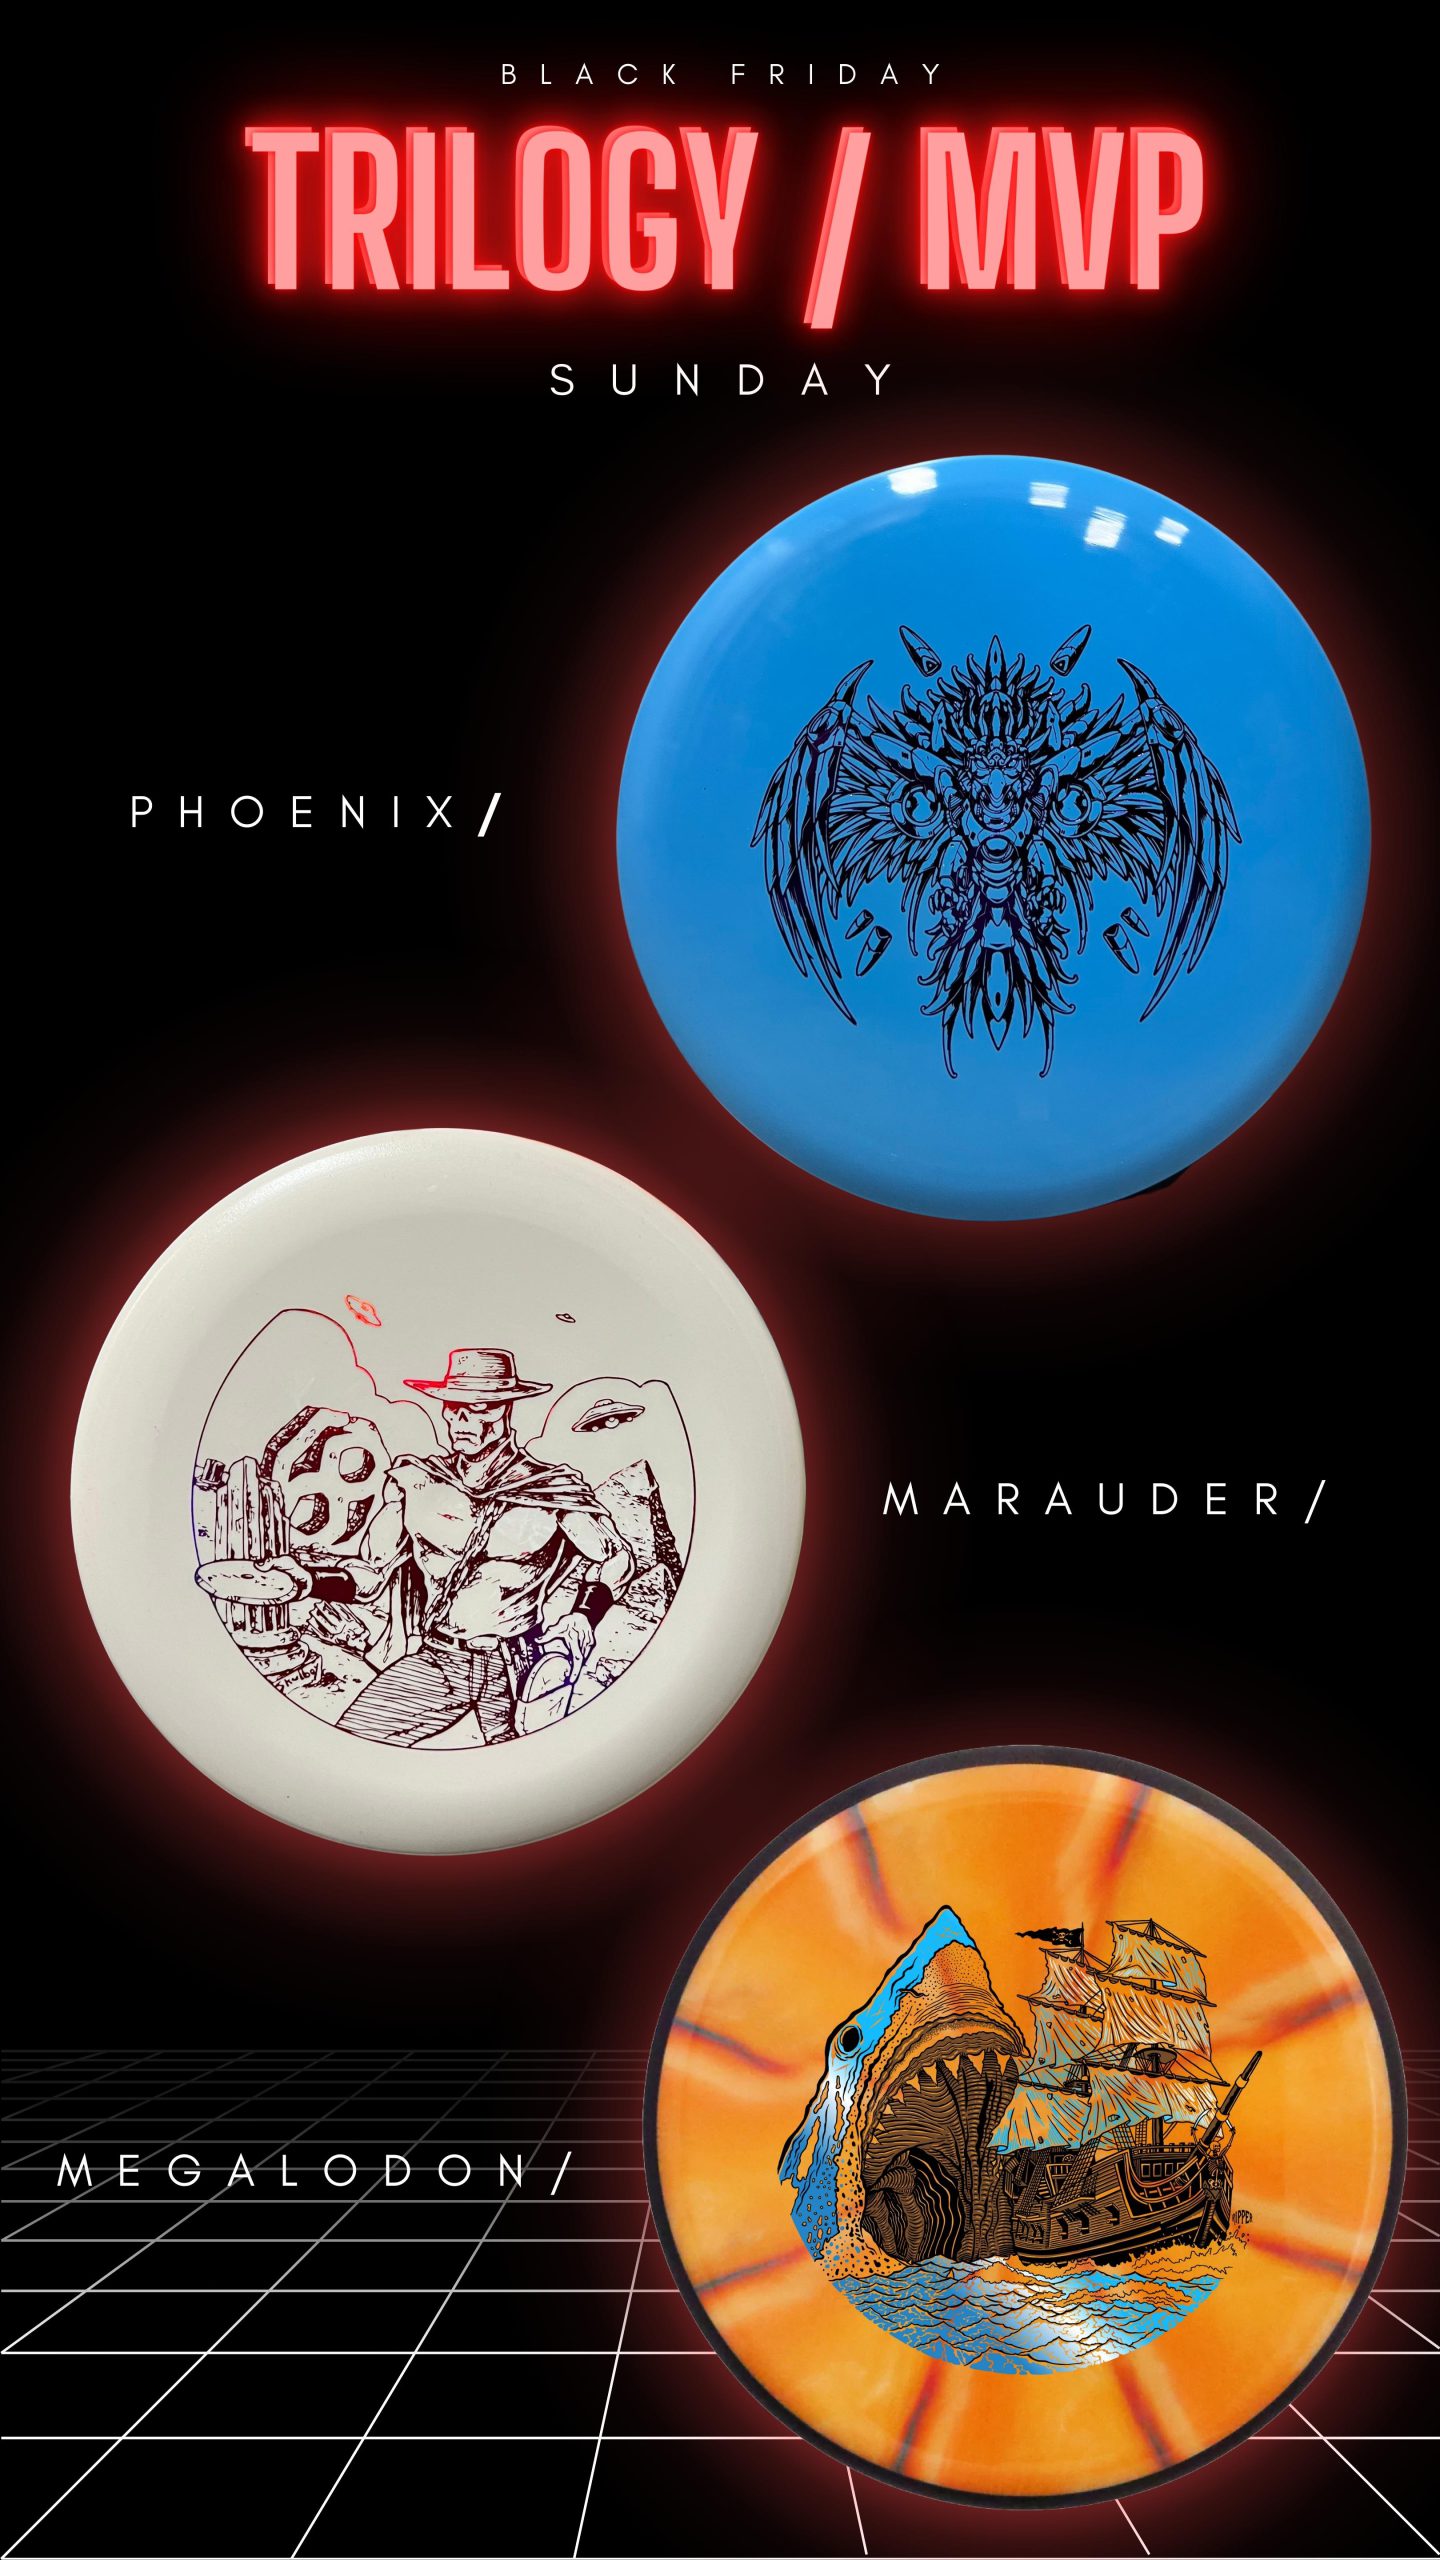 Trilogy and MVP Discs on sale and MVP Triple Foil Megaladon exclusive stamps. 